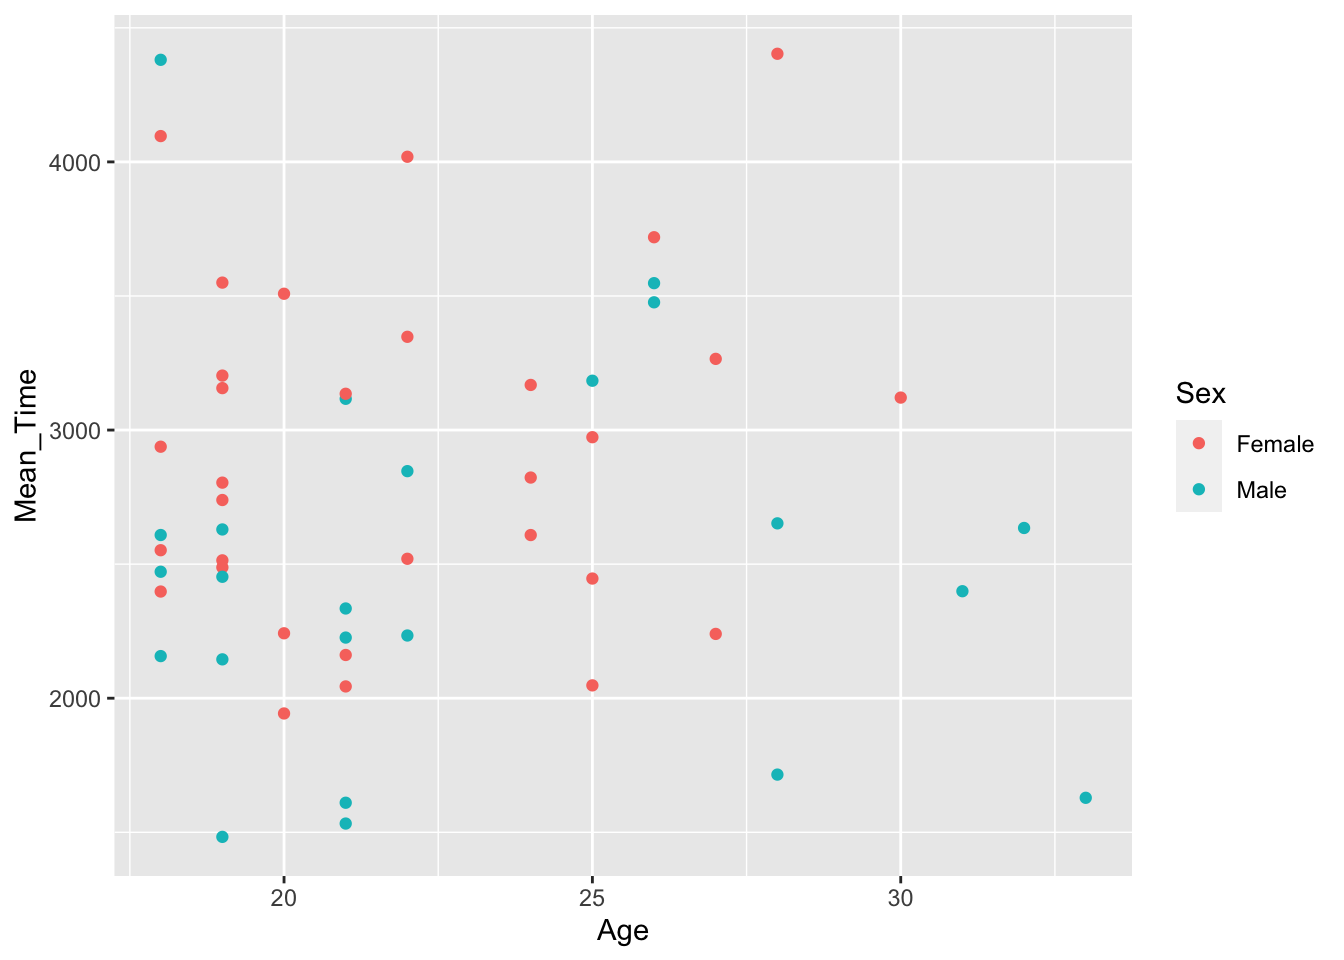 A scatterplot of Mean Time as a function of Age